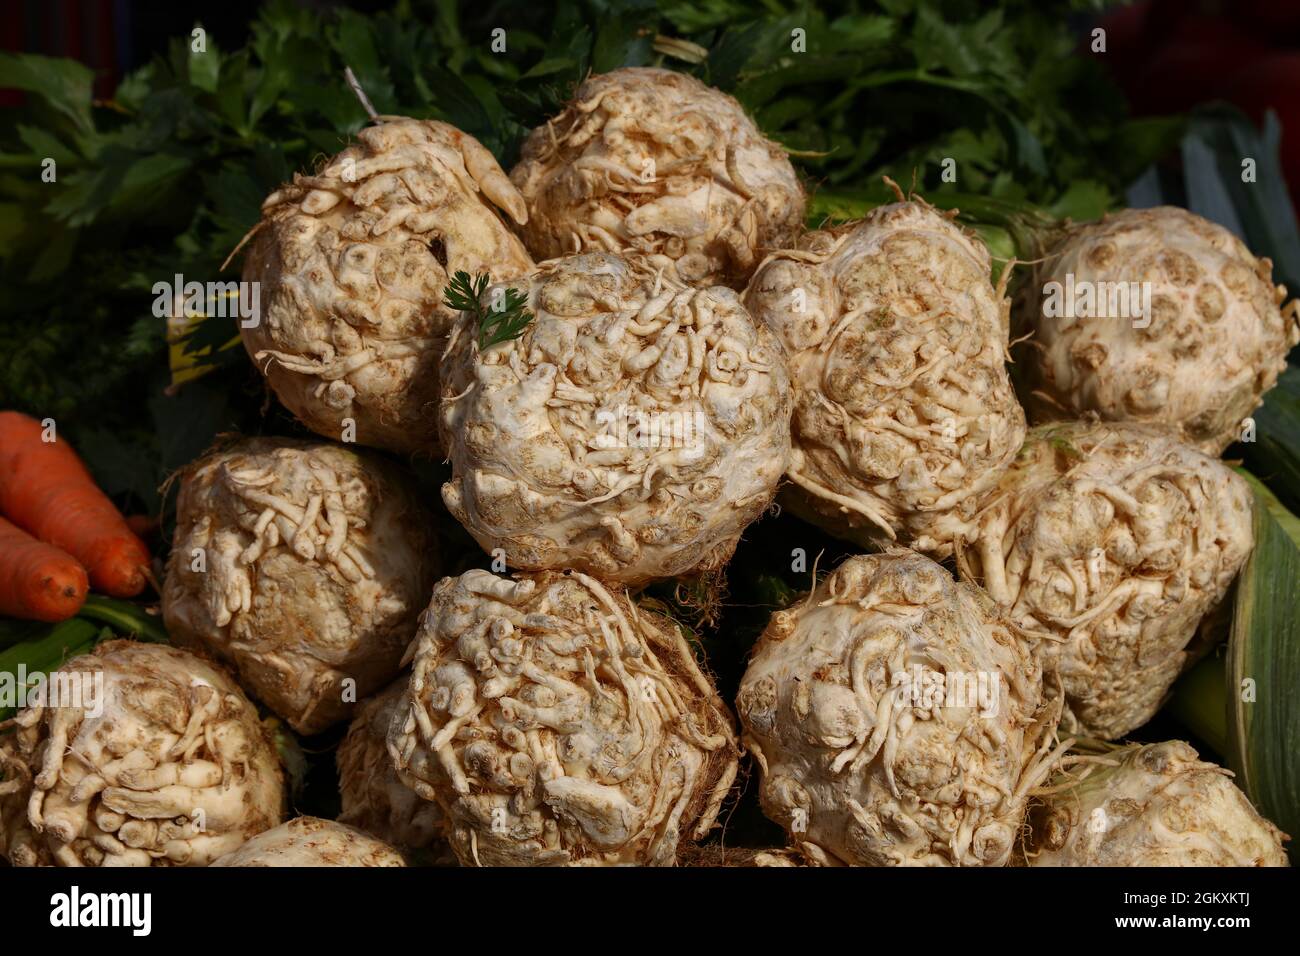 Close up knob turnip rooted celery with green stalk bunch on retail display of fresh food market, high angle view, Stock Photo